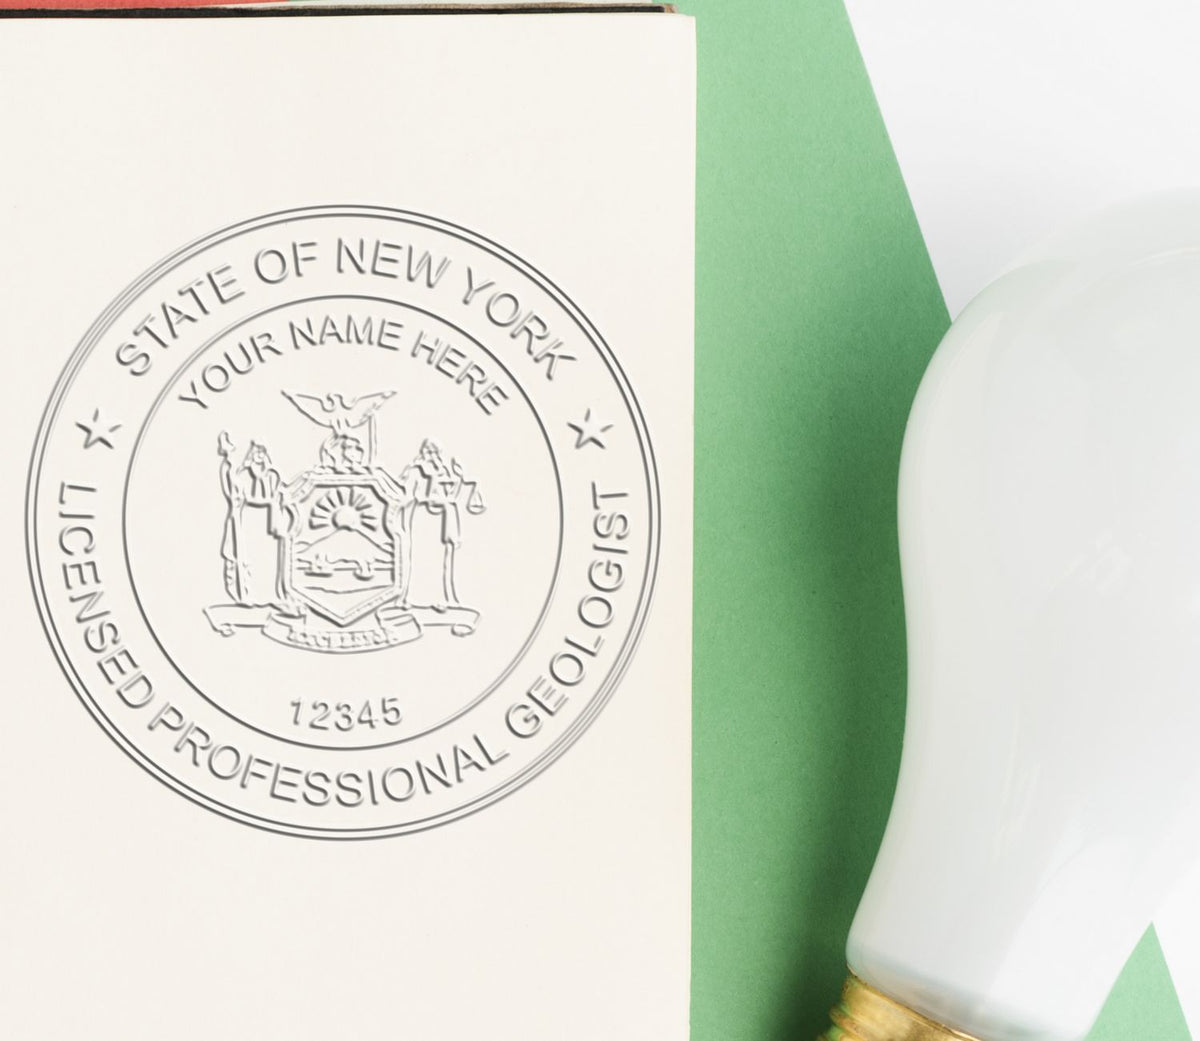 An in use photo of the Soft New York Professional Geologist Seal showing a sample imprint on a cardstock